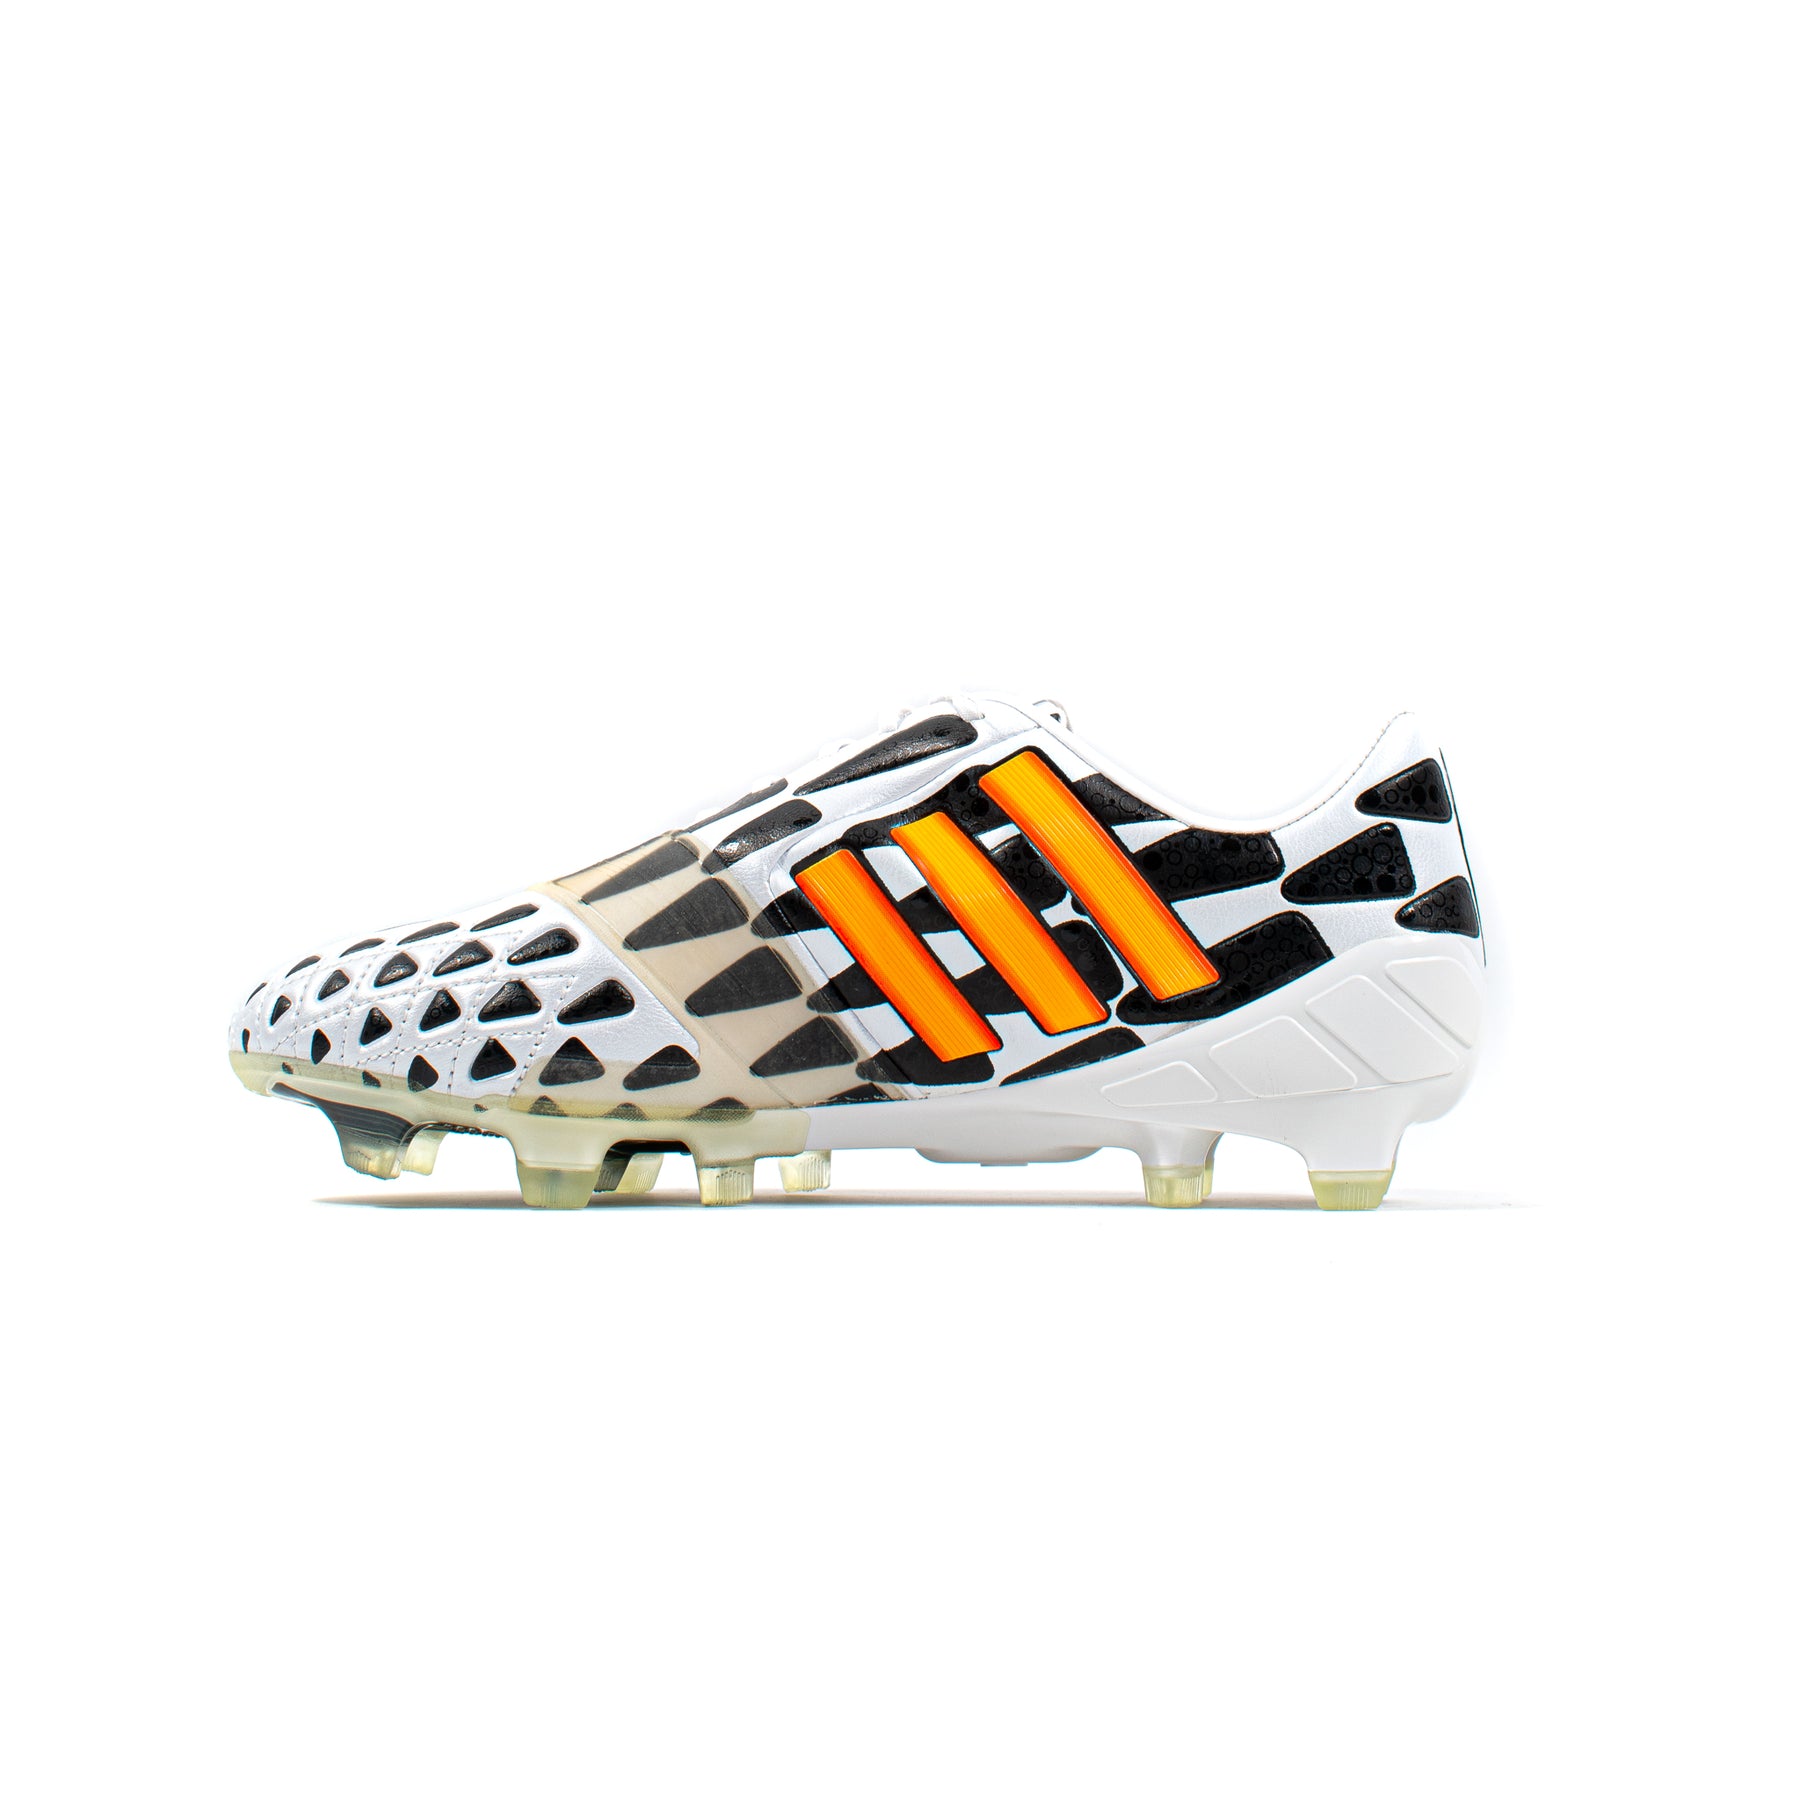 Incompatible extremidades Pareja Adidas Nitrocharge 1.0 World Cup 2014 FG – Classic Soccer Cleats